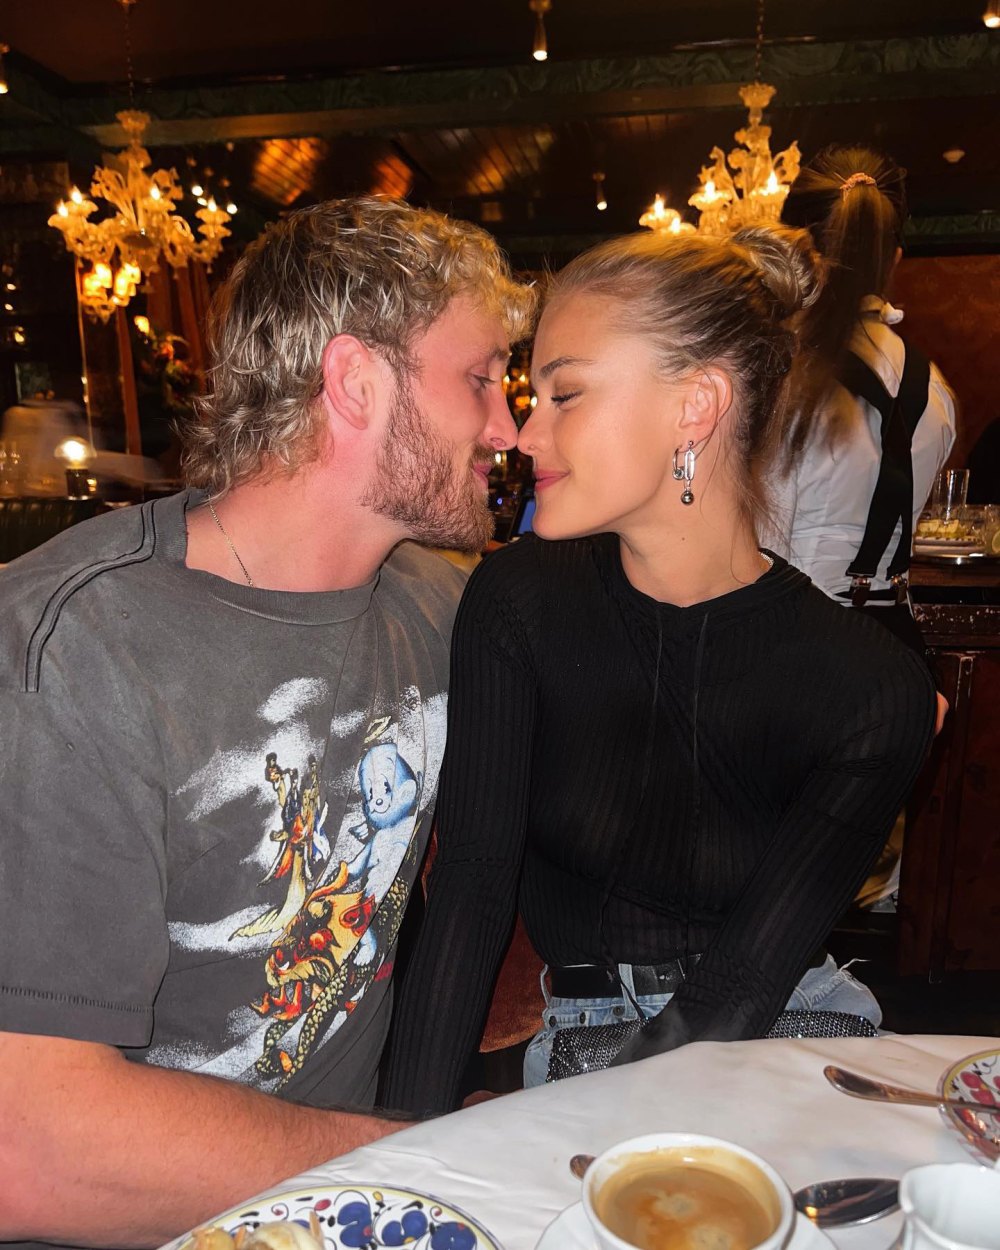 Nina Agdal and Logan Paul Are Engaged After Less Than 1 Year of Dating: 'Love This Girl to Infinity'